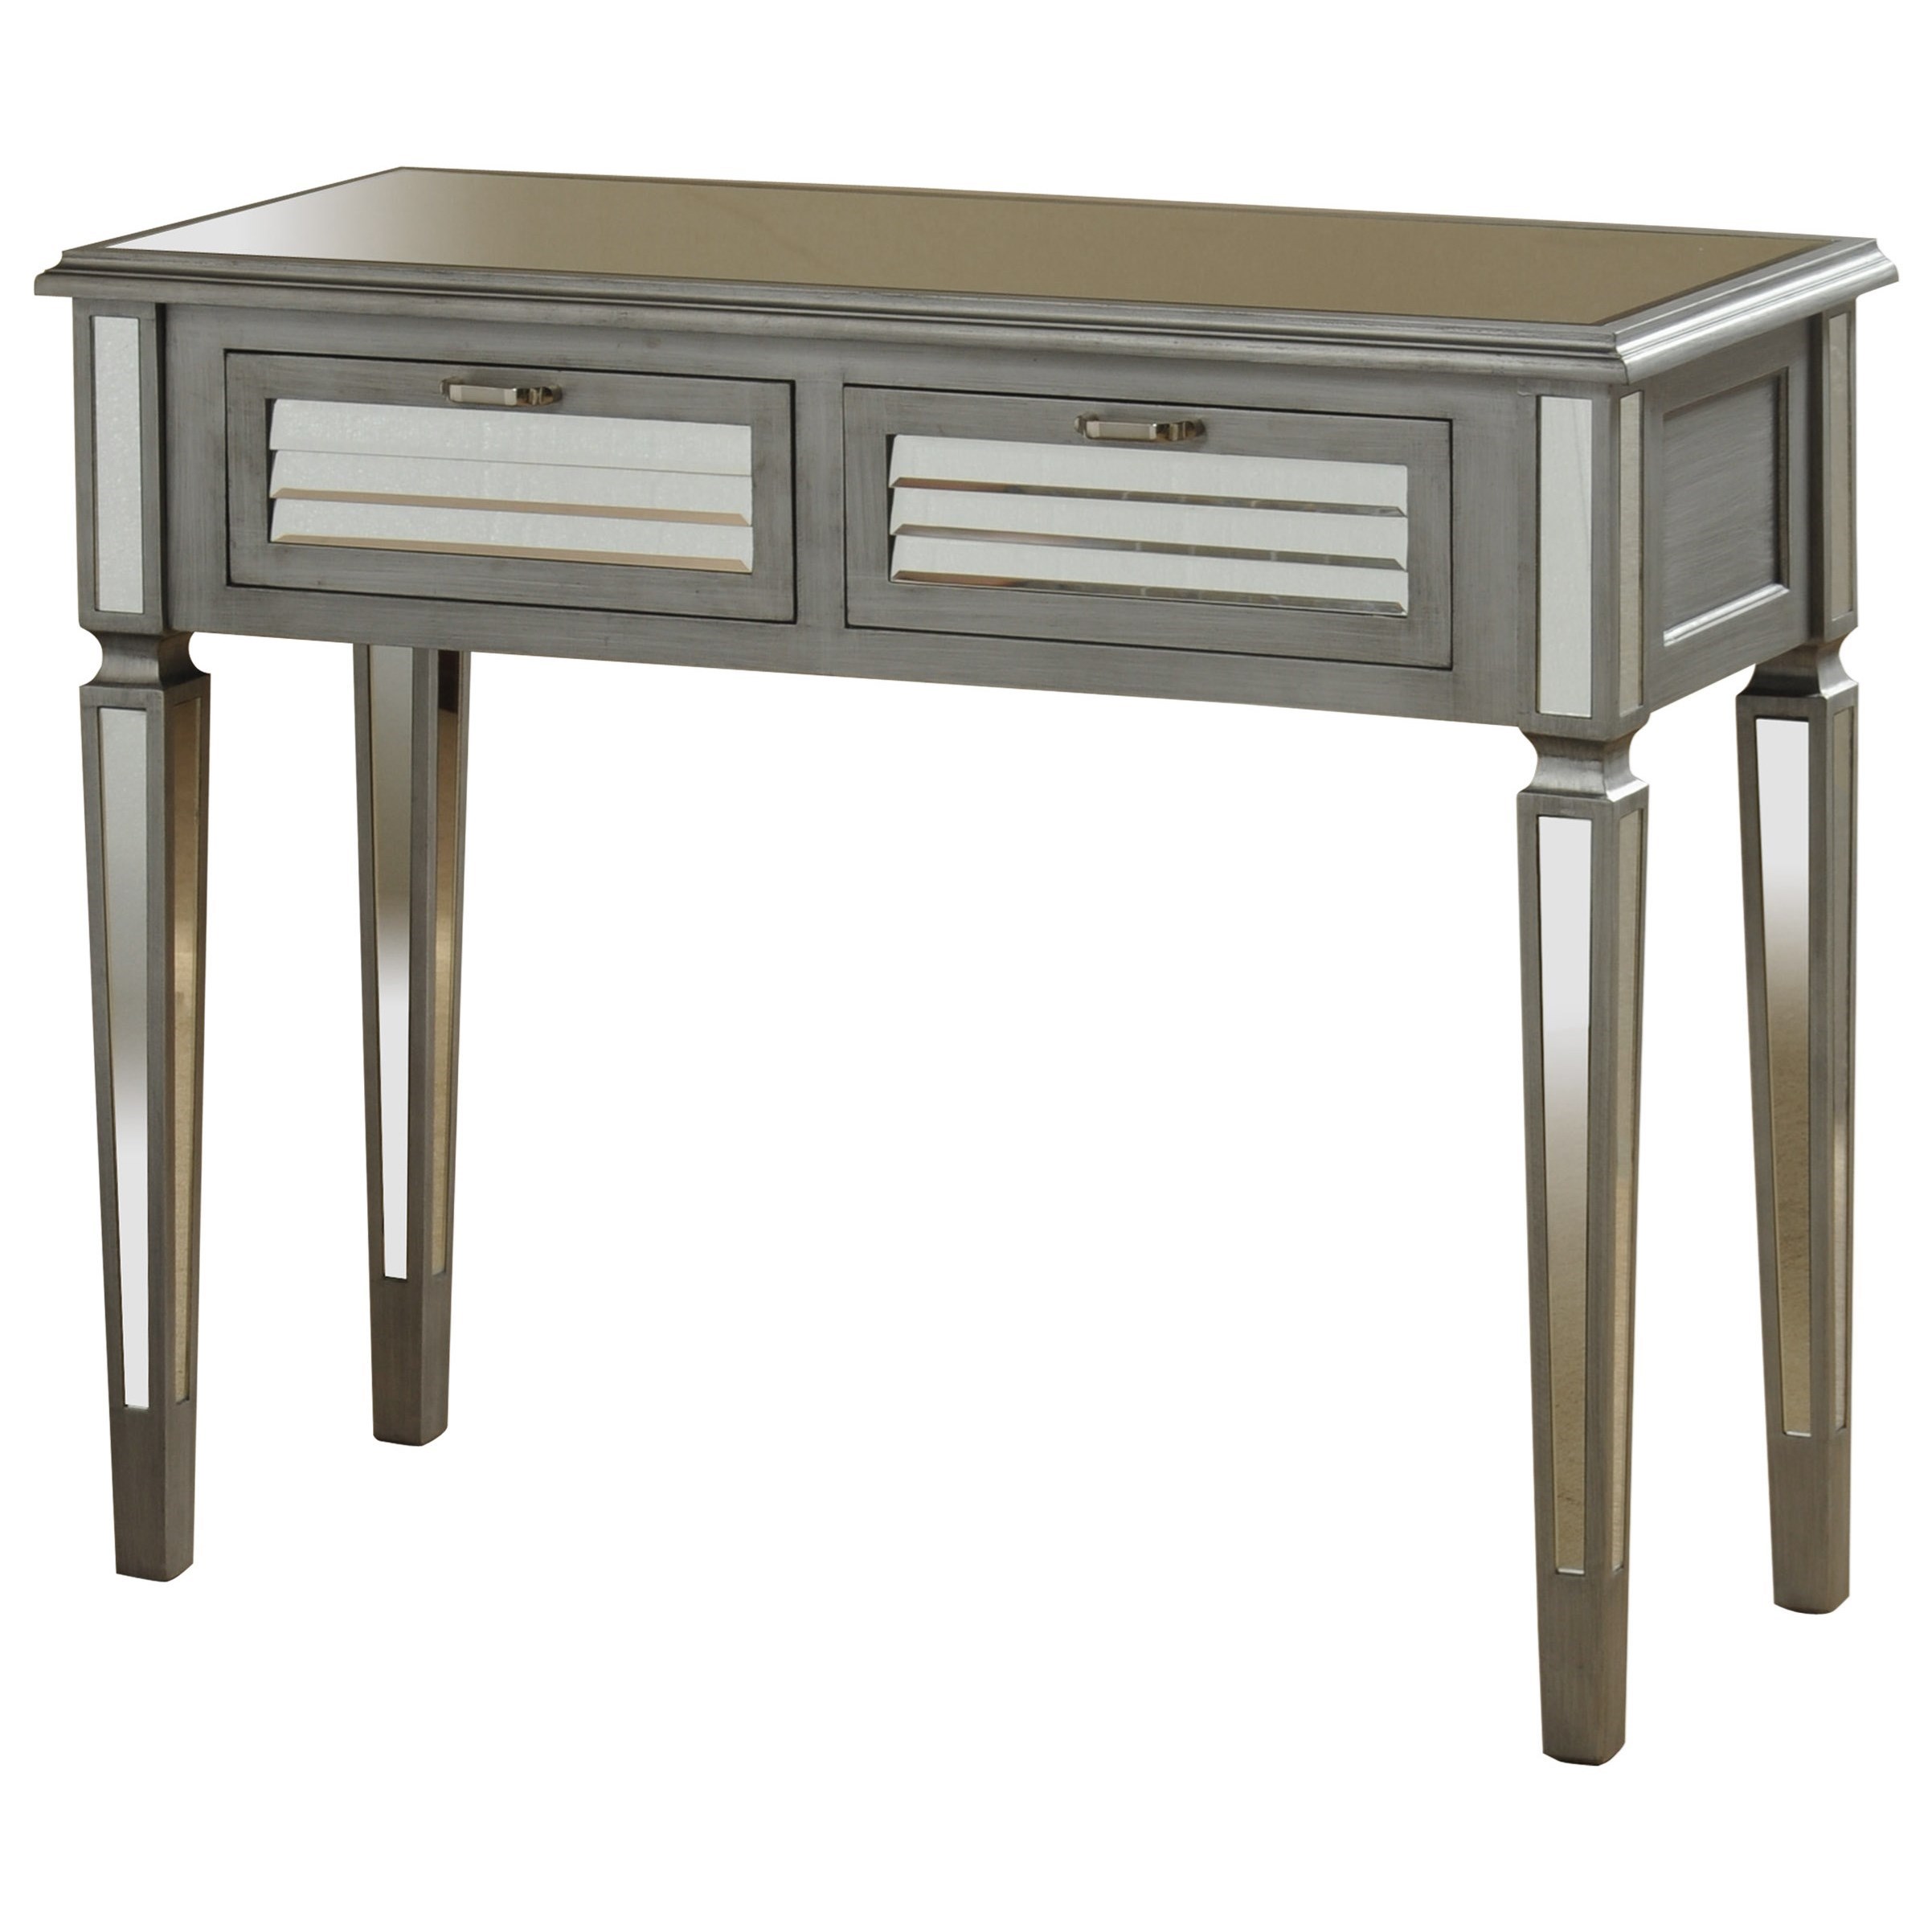 2 Drawer Console Table with Shutter Design Drawers and Mirrored Inserts